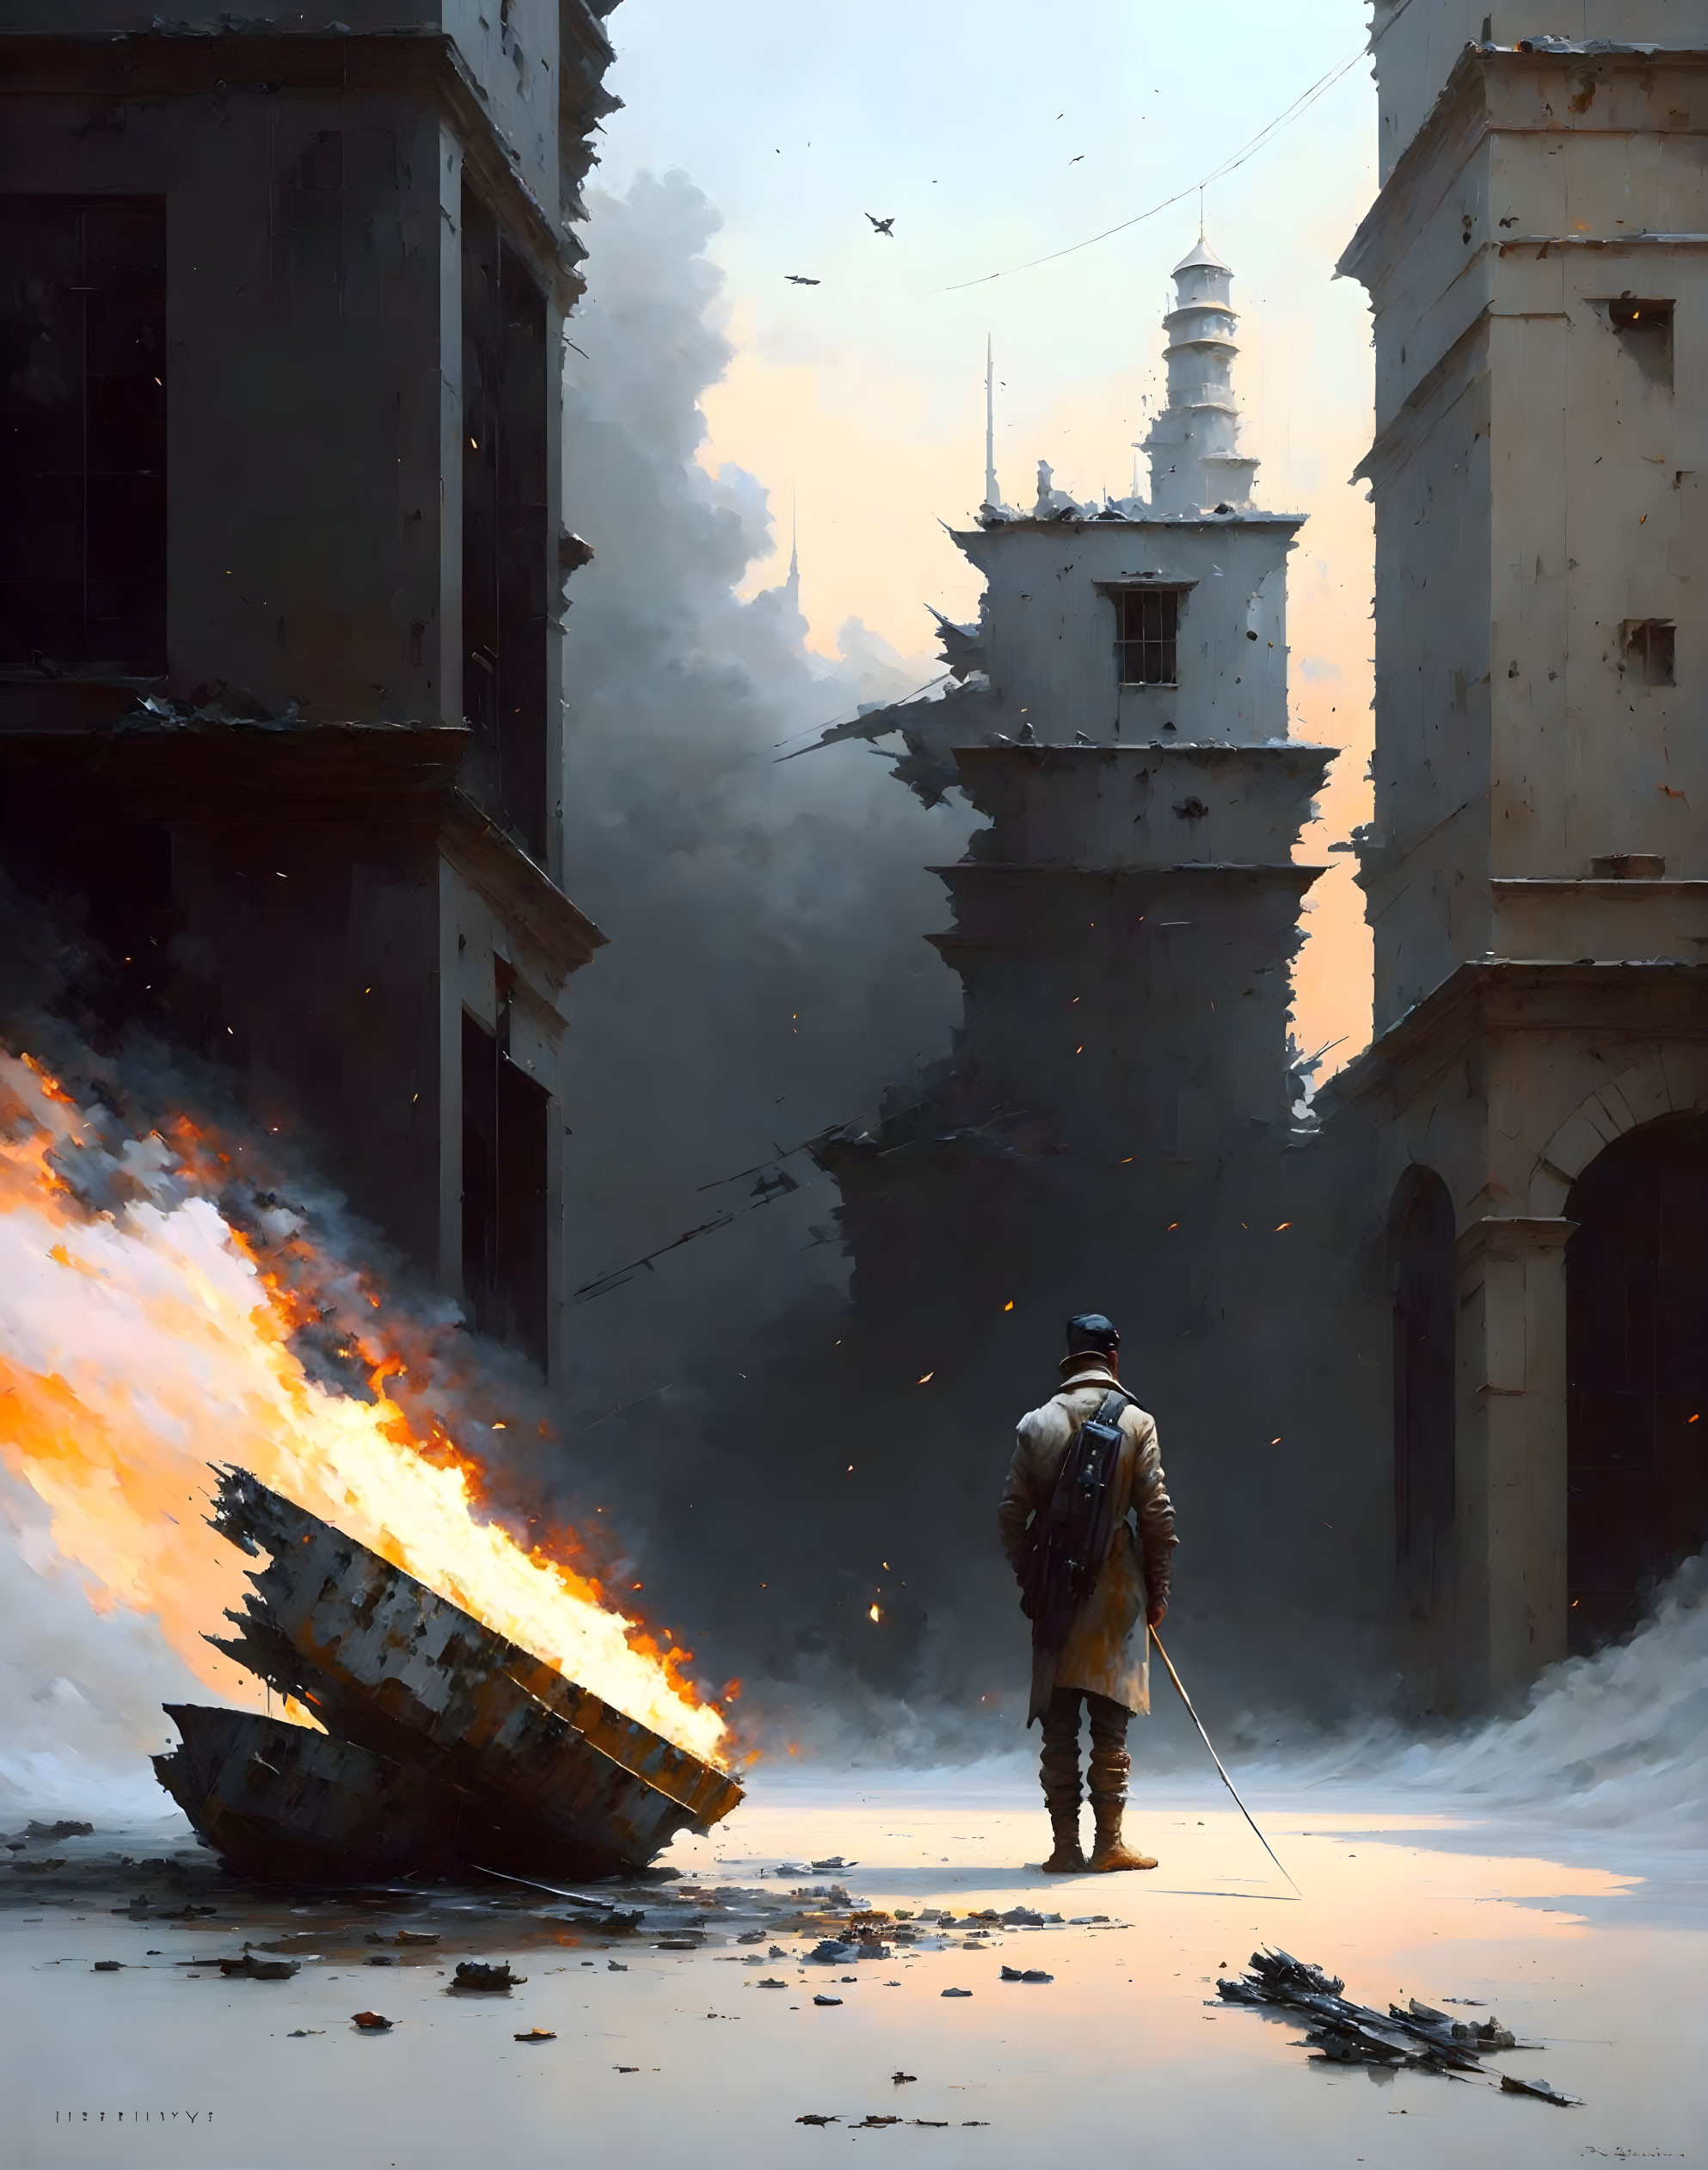 Solitary figure in war-torn cityscape with burning vehicle and damaged buildings